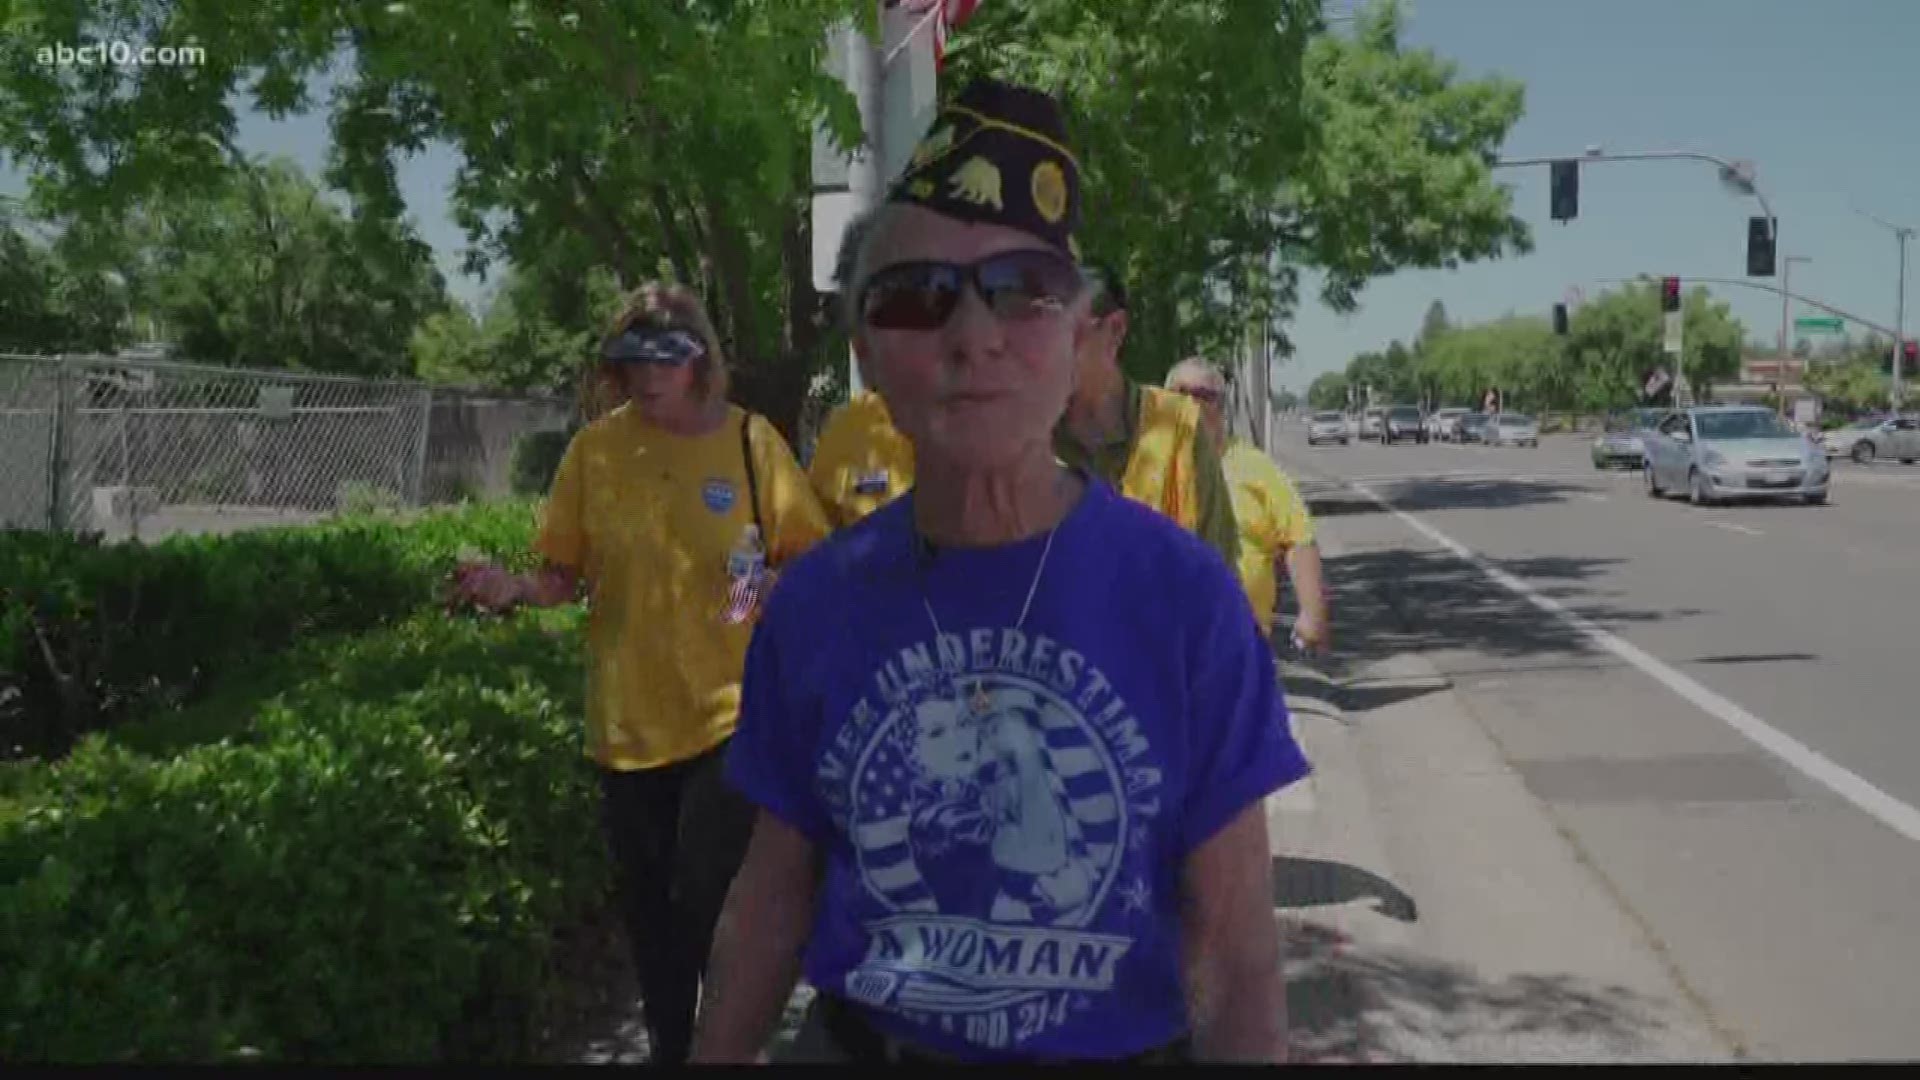 A woman shared her story of service during a walk on Memorial Day.